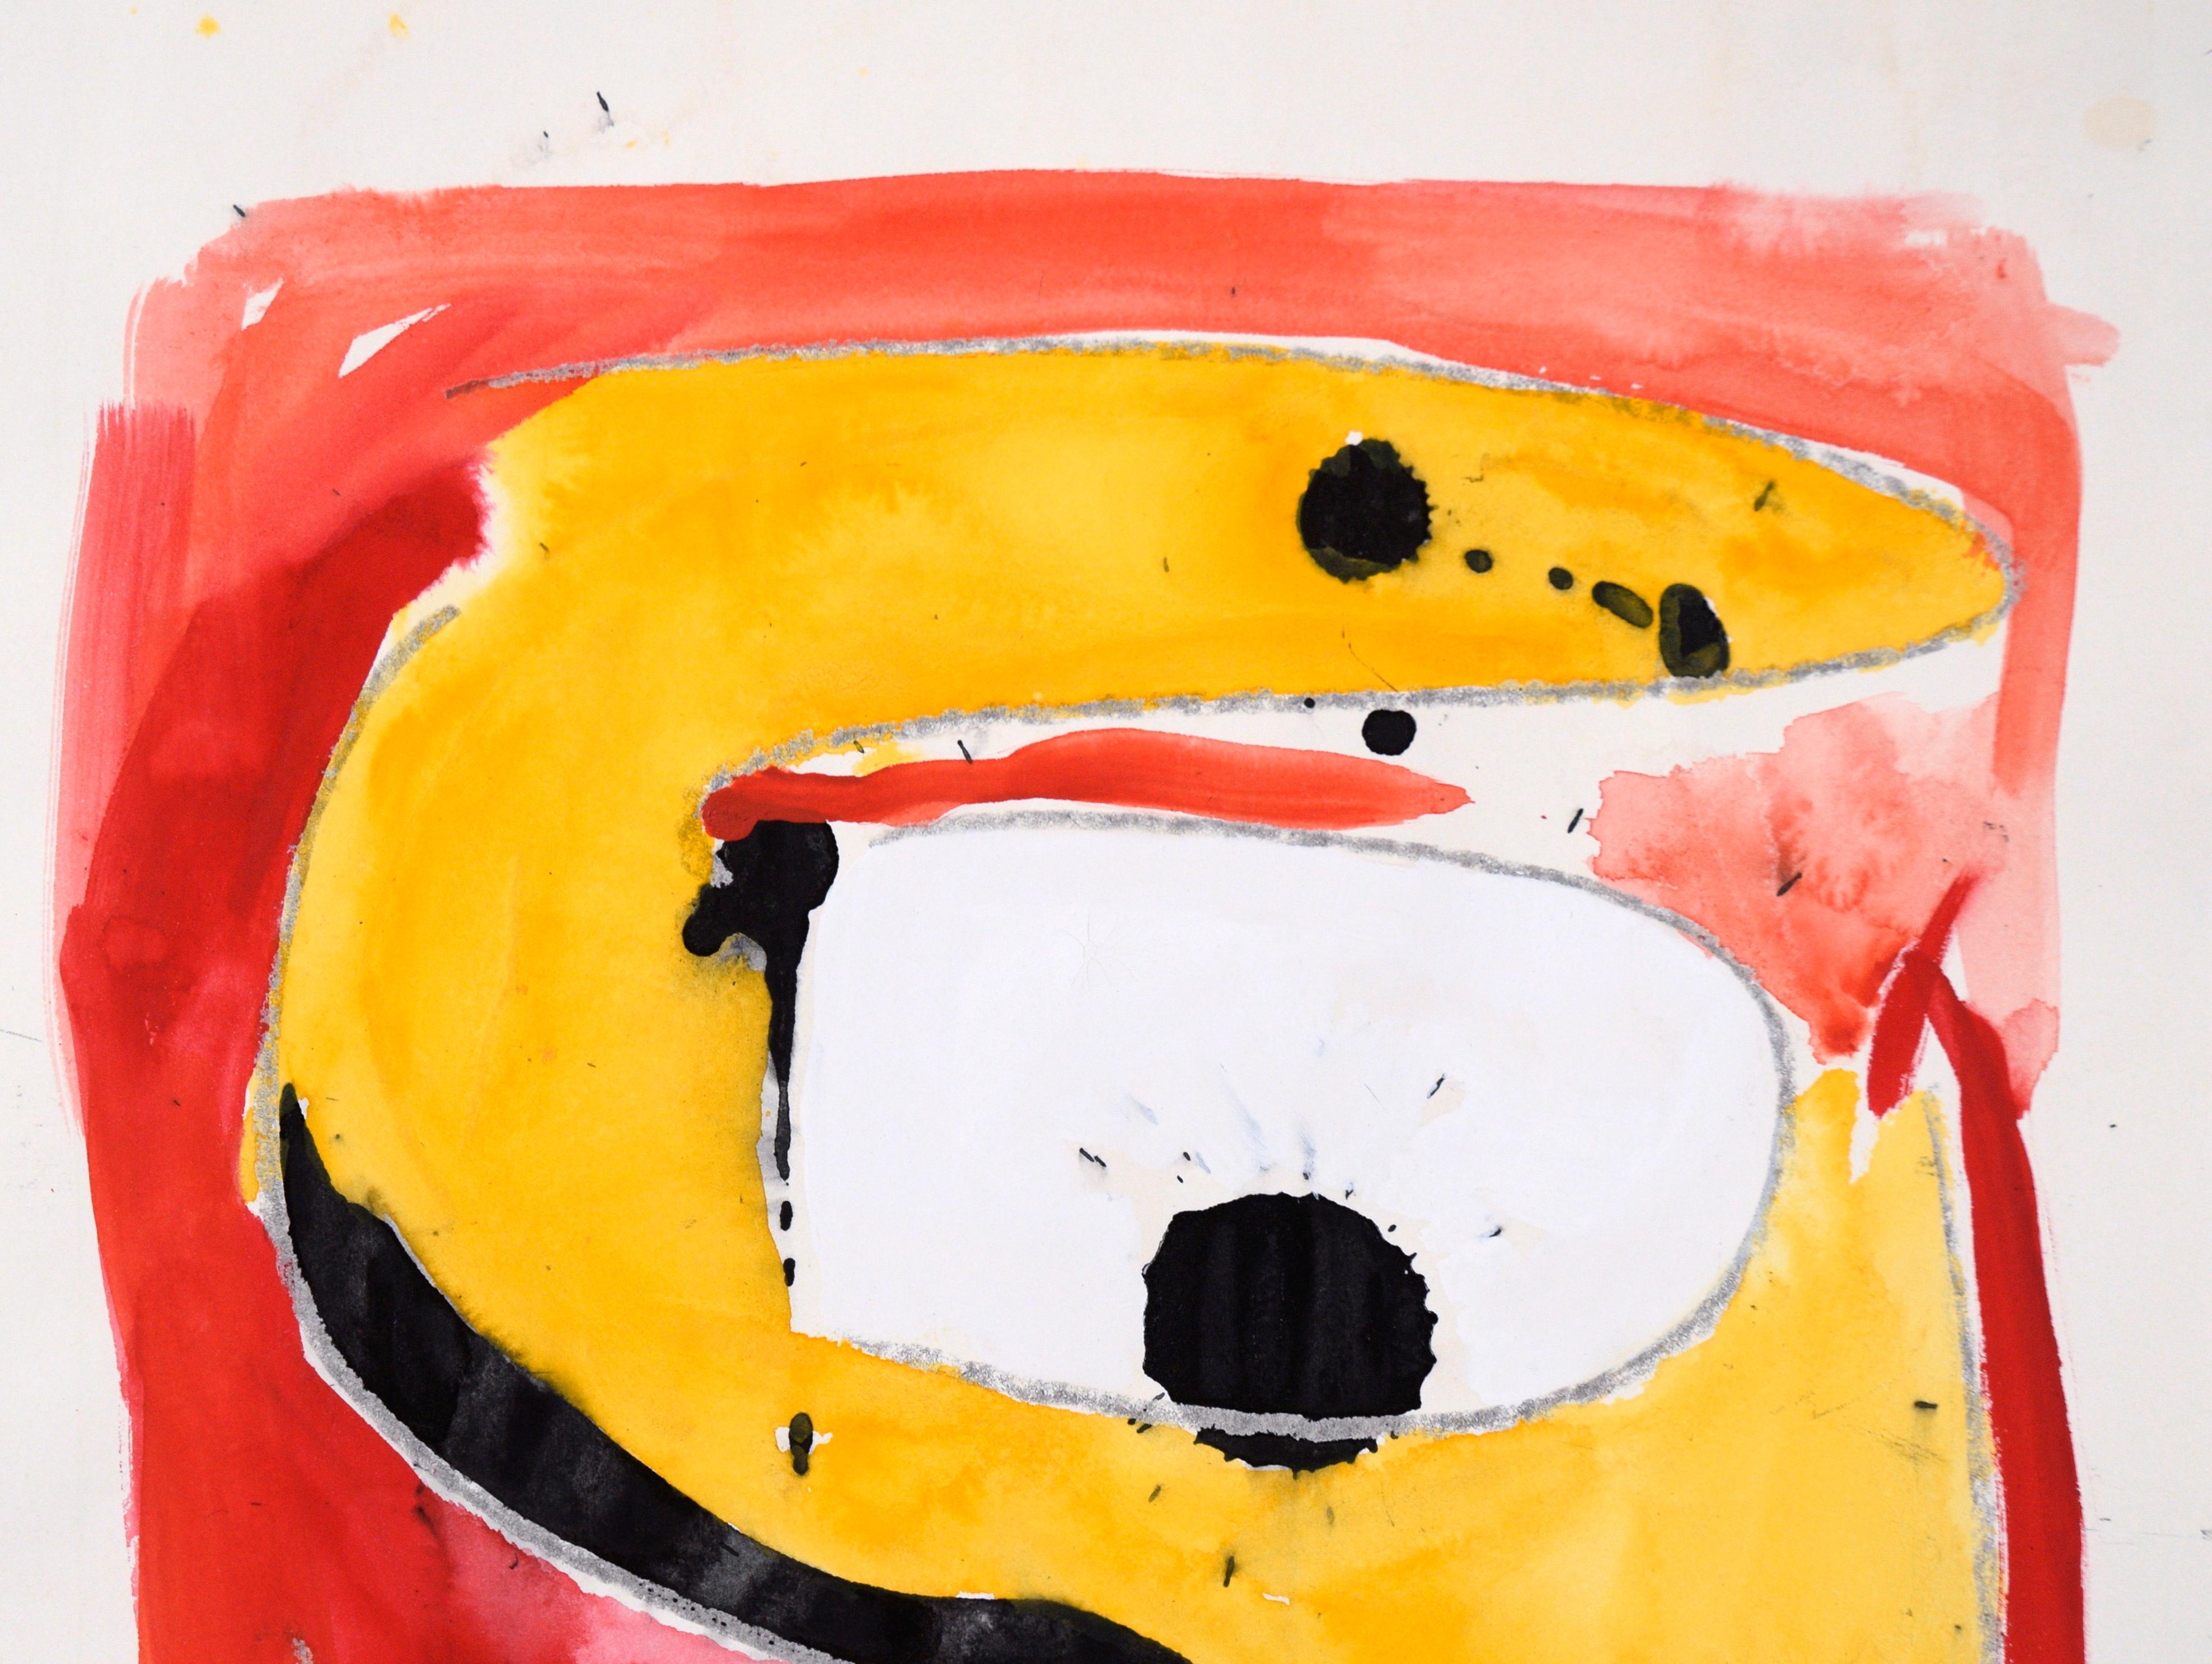 Abstract Expressionist Composition in Yellow, Red, and Black in Acrylic on Paper - Painting by Ricardo de Silva